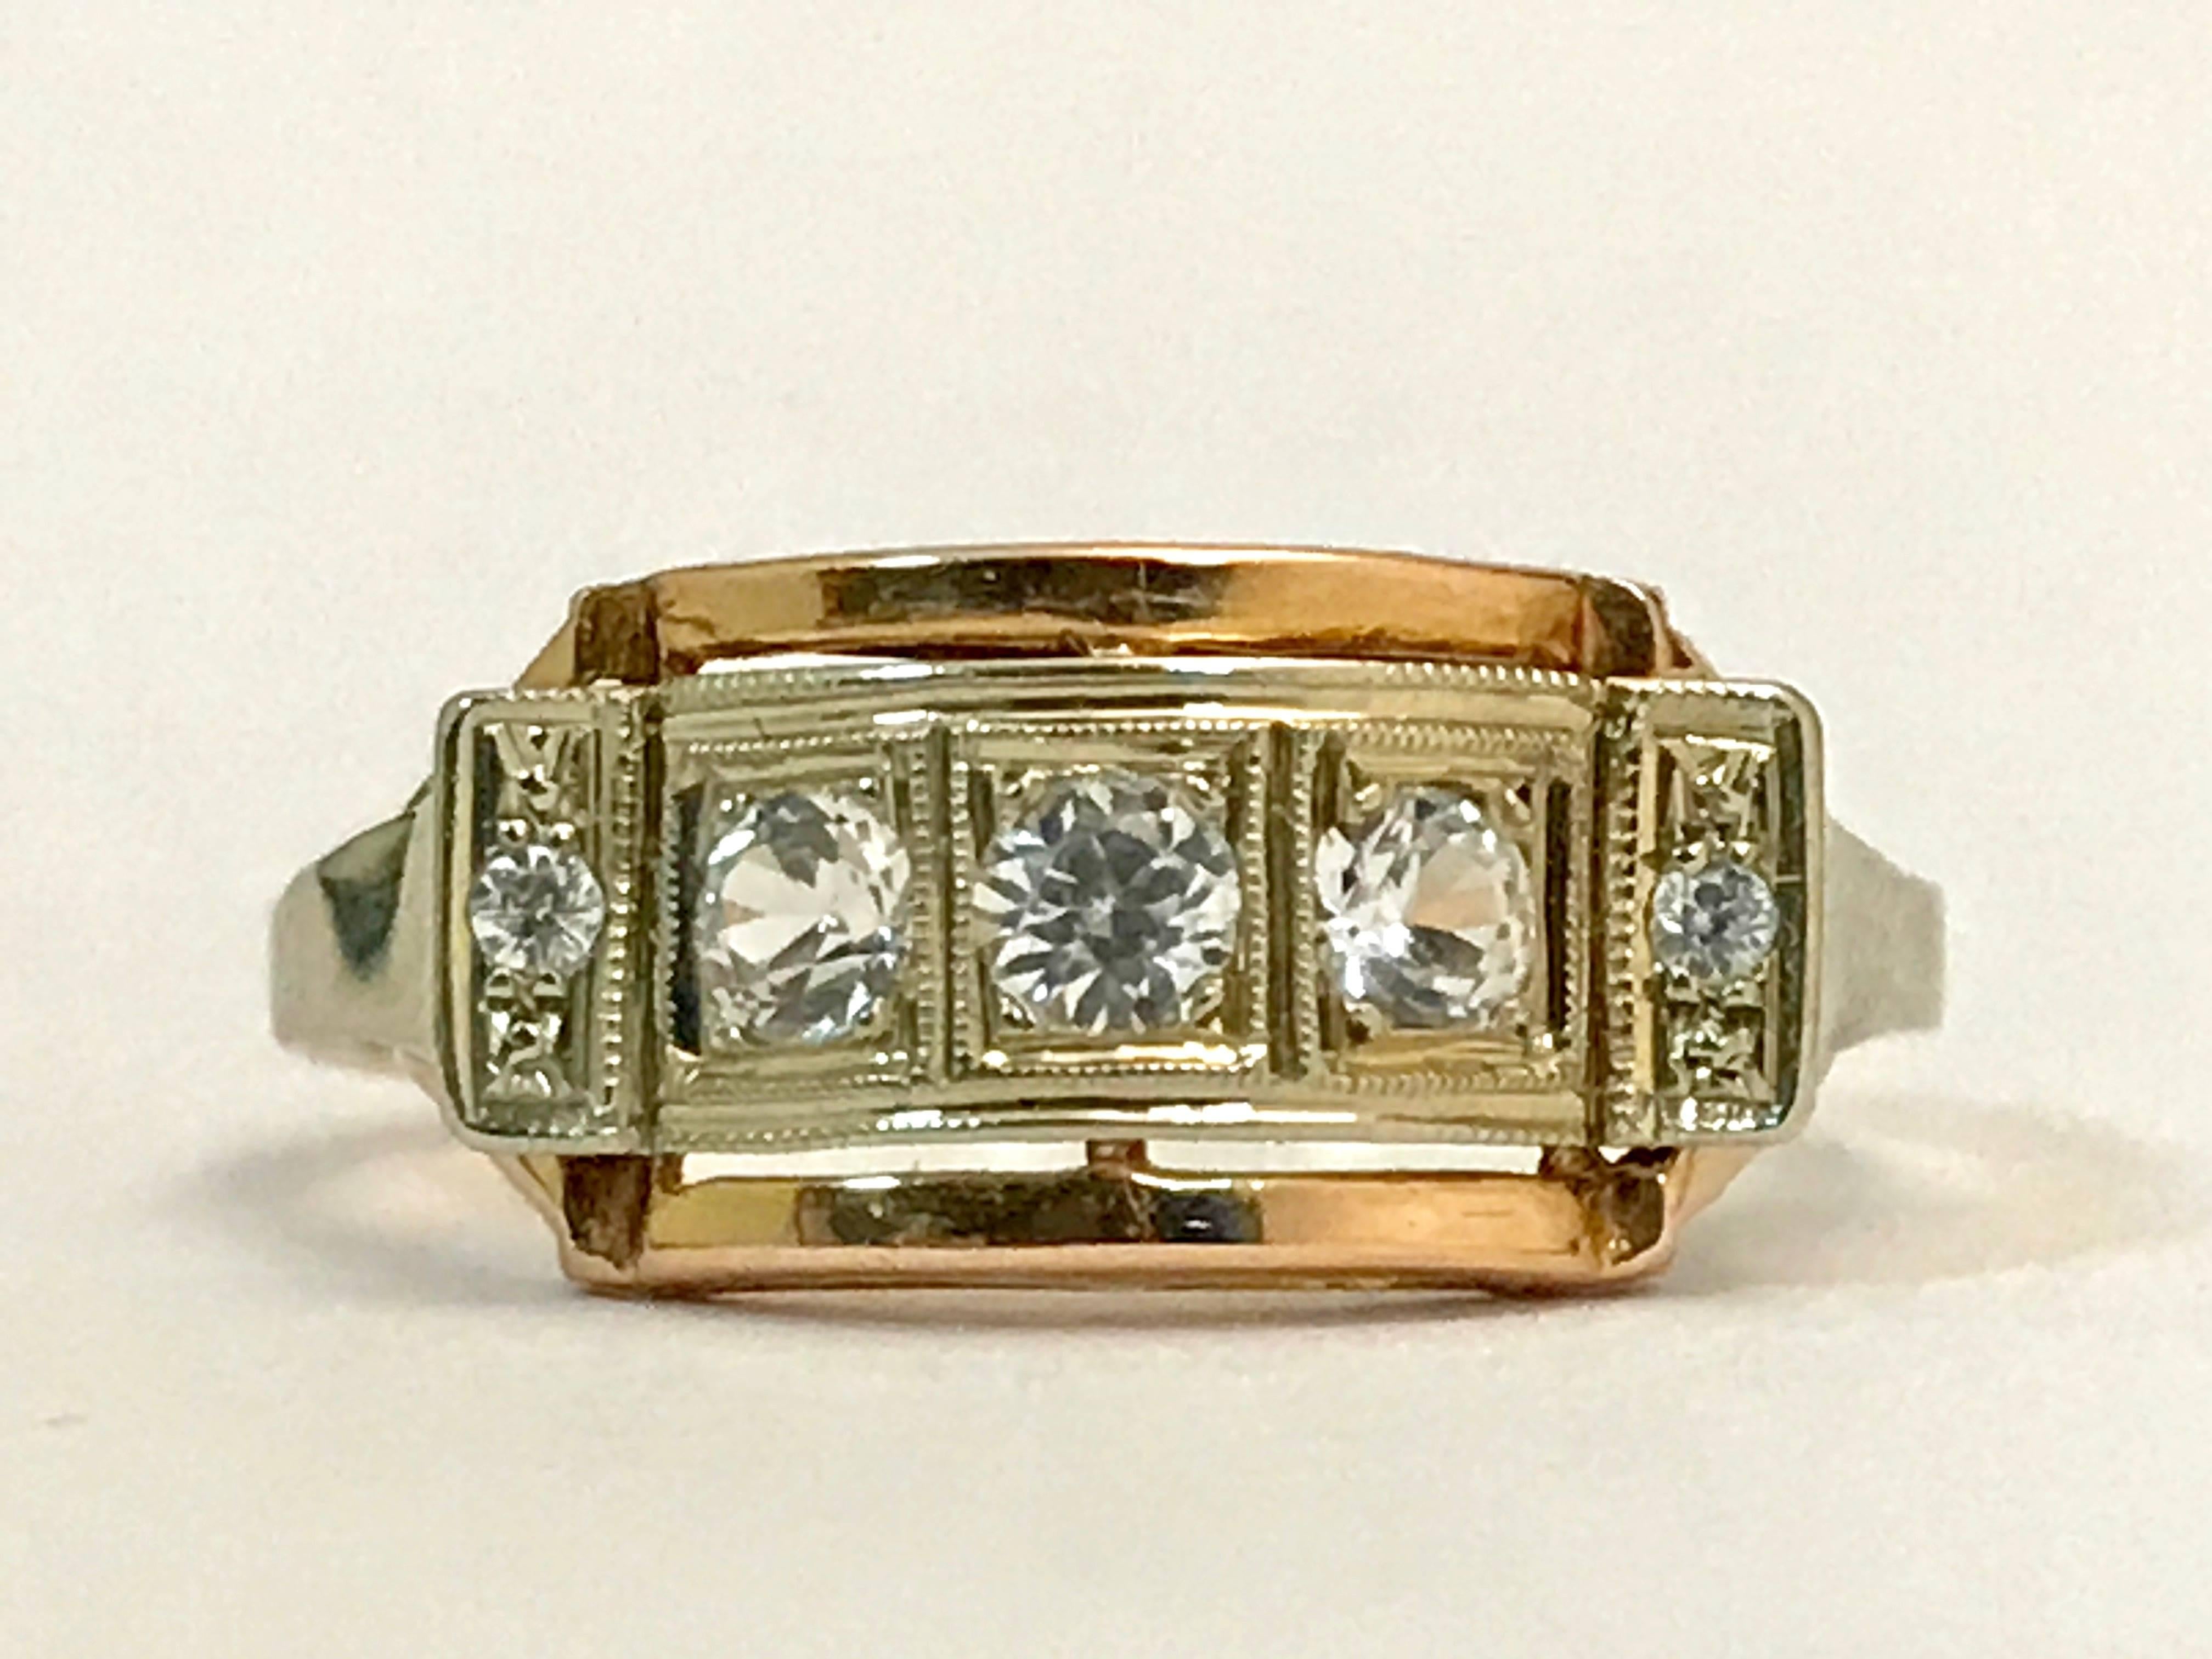 The refined design of this rose gold ring makes it truly unique. The finely chased details in rose gold add a touch of sophistication and timeless elegance to this exceptional piece. The meticulous choice of quartz stones adds a touch of magic to